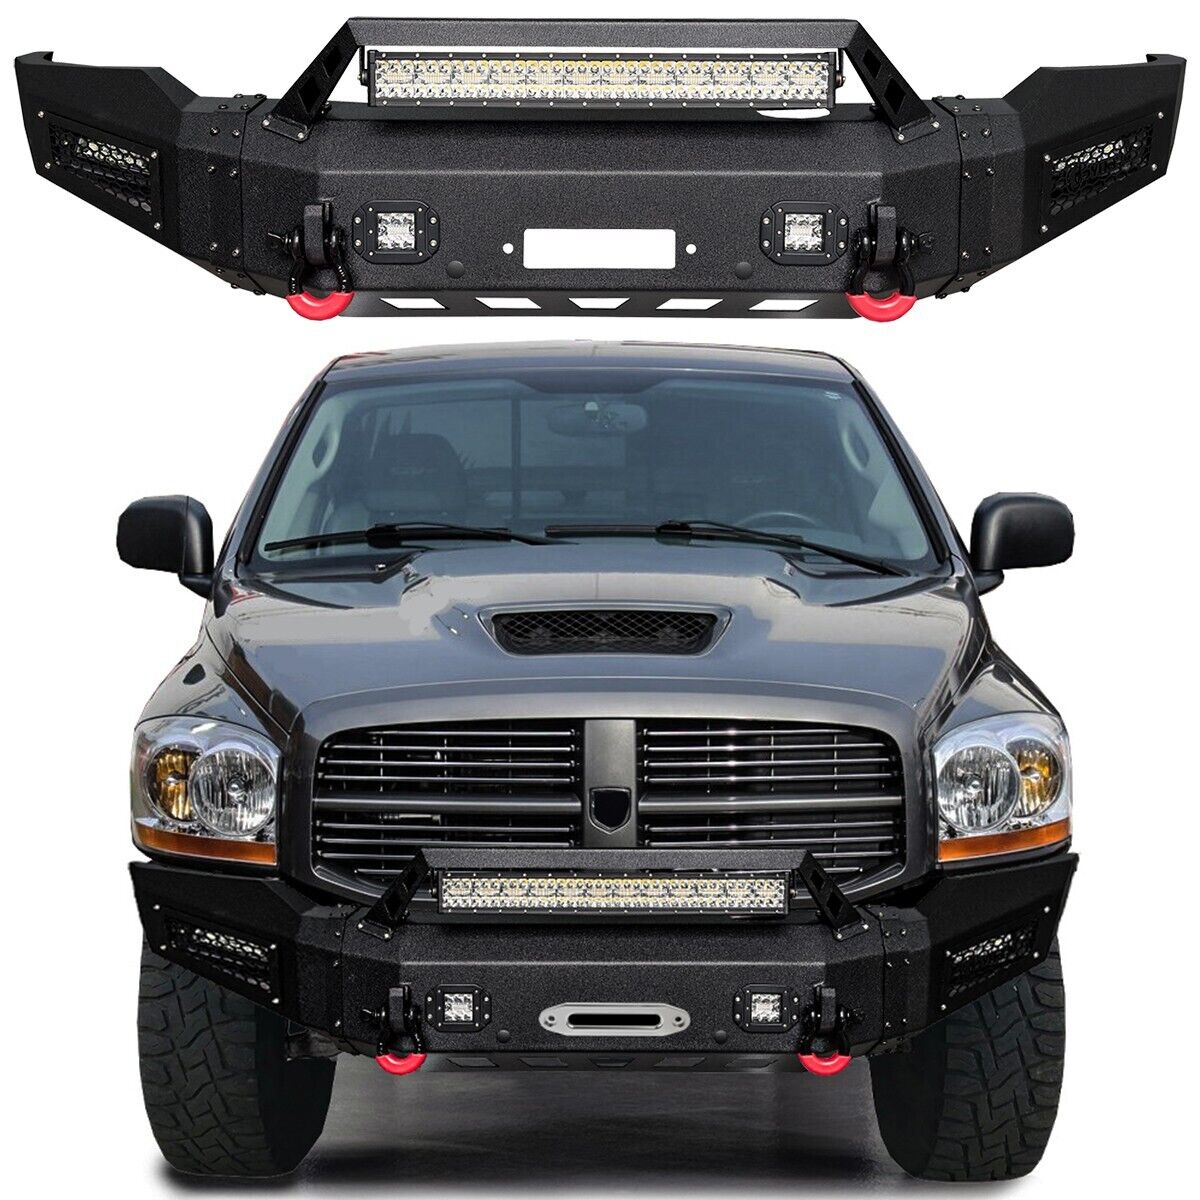 Vijay For 2006-2008 Dodge Ram 1500 Front Bumper with Winch Plate & LED Lights